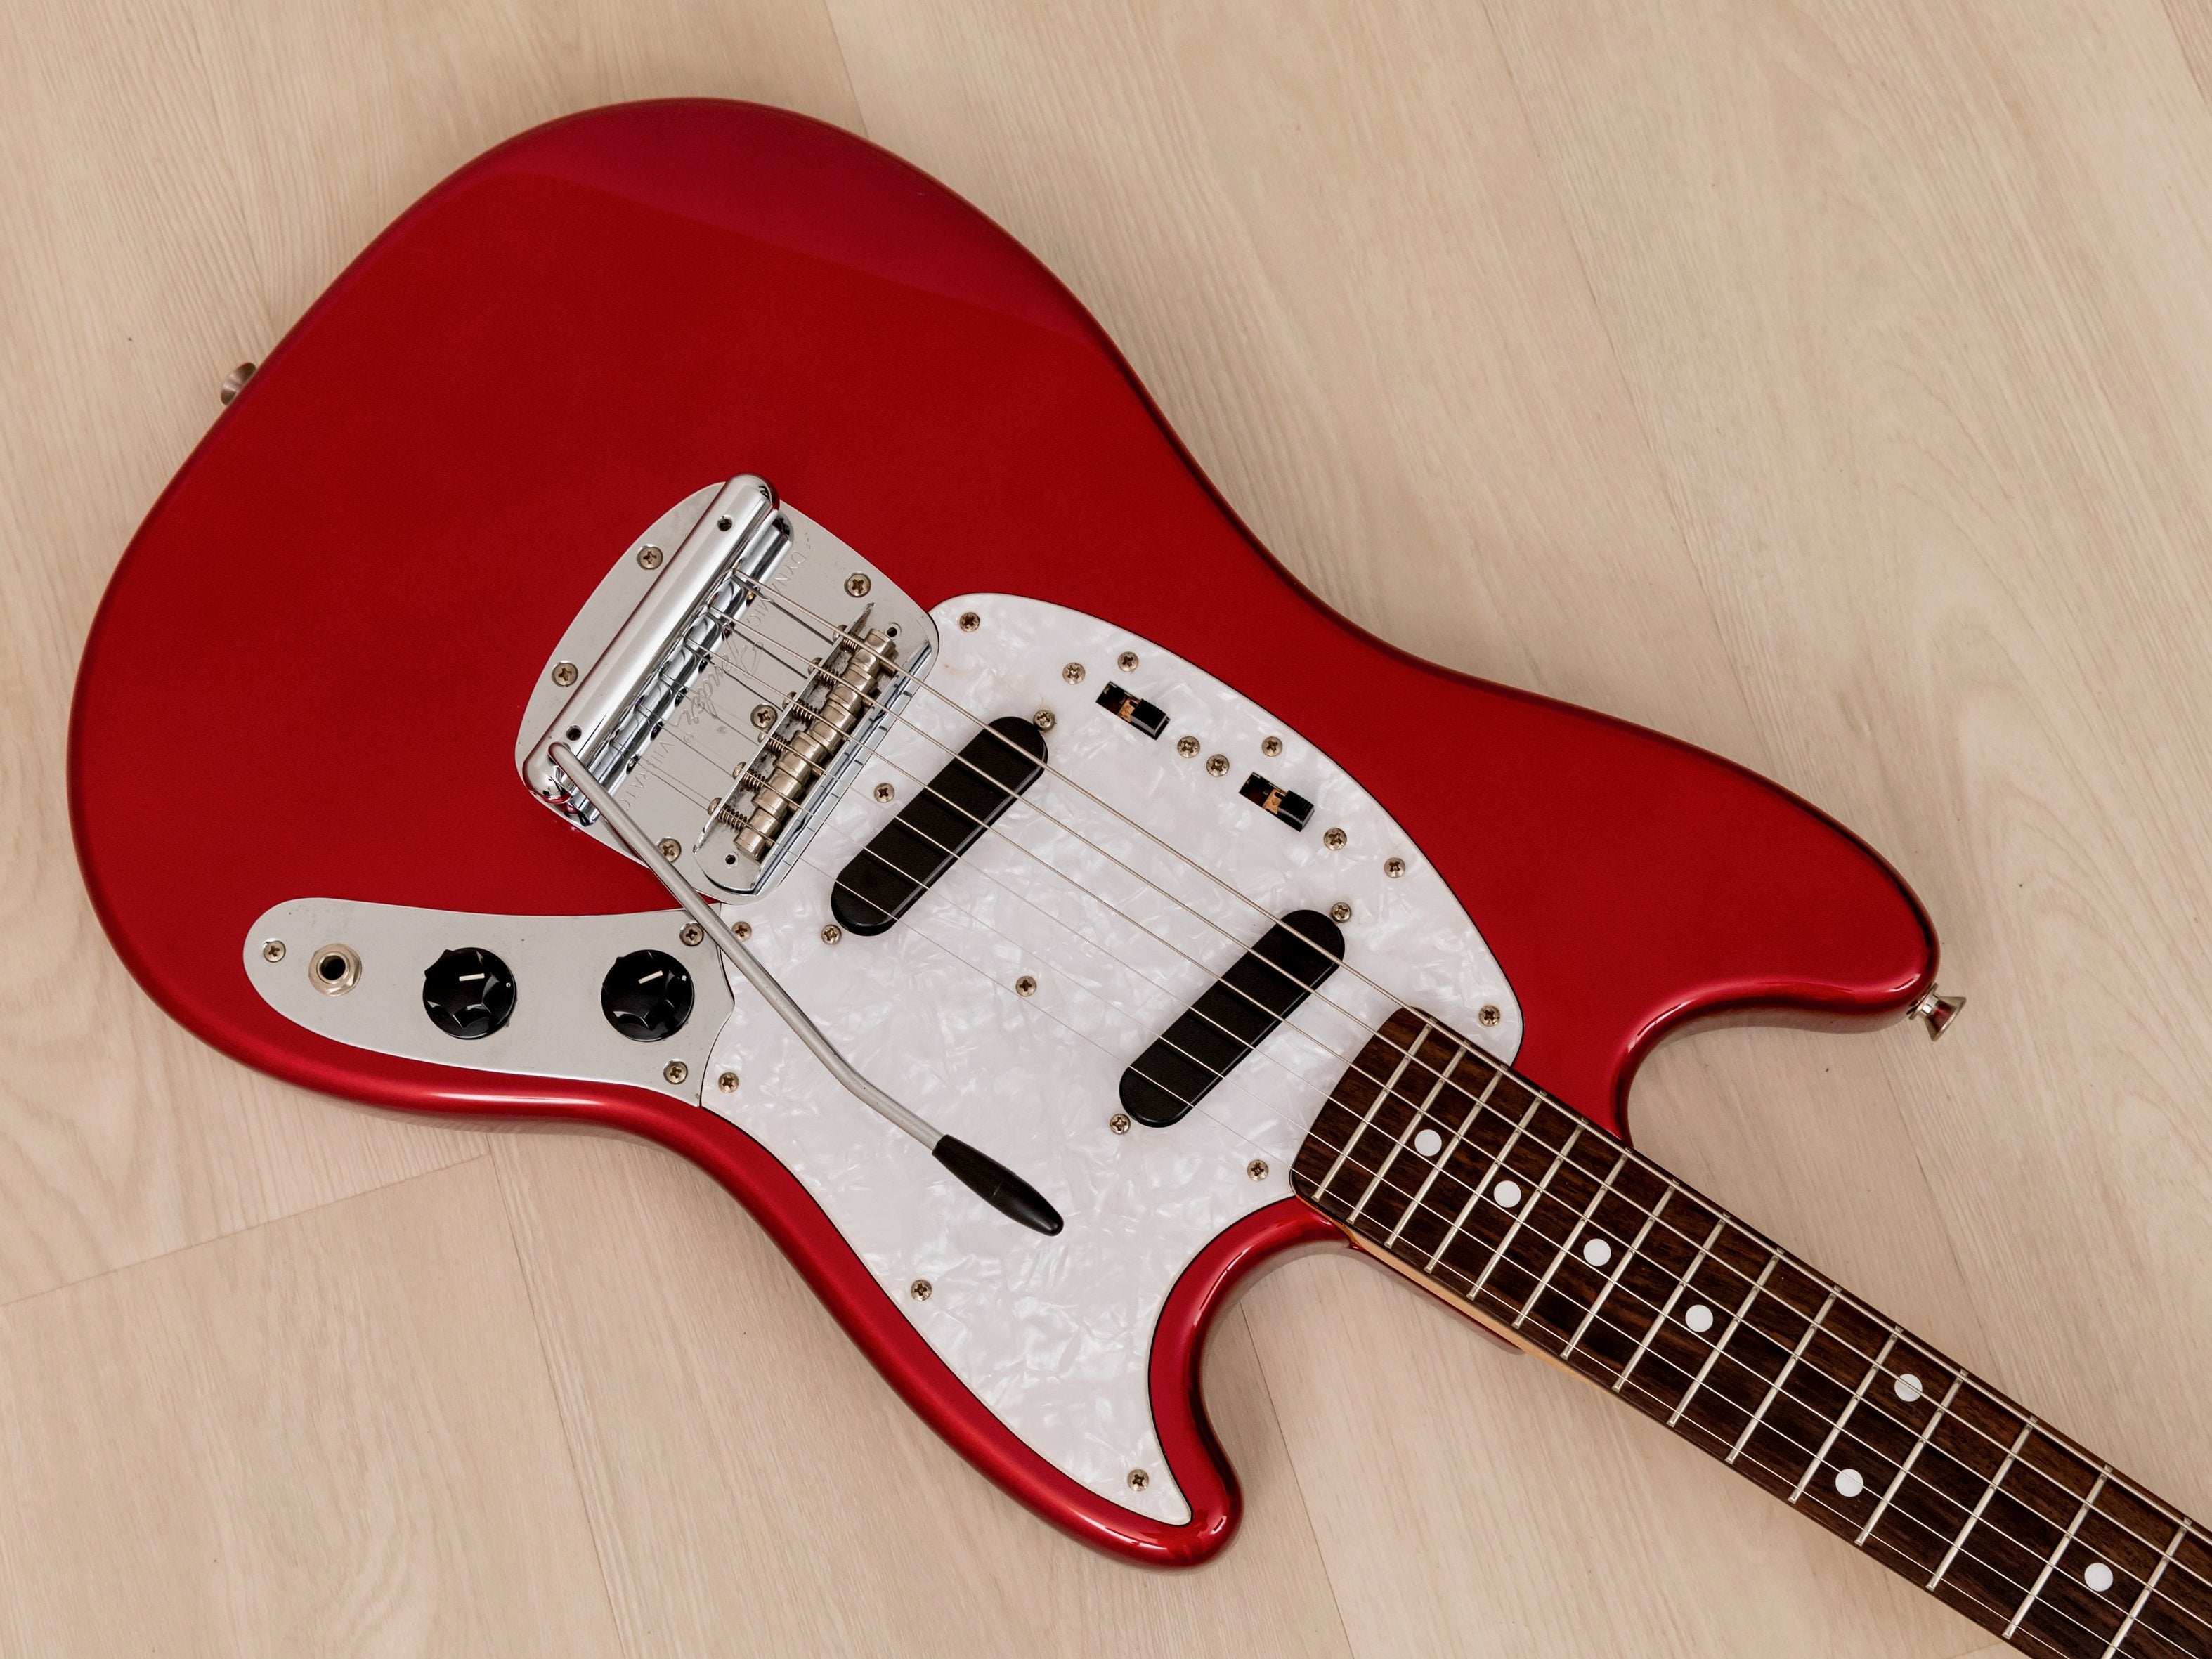 2010 Fender Mustang '69 Vintage Reissue MG69/MH Candy Apple Red, Japan MIJ